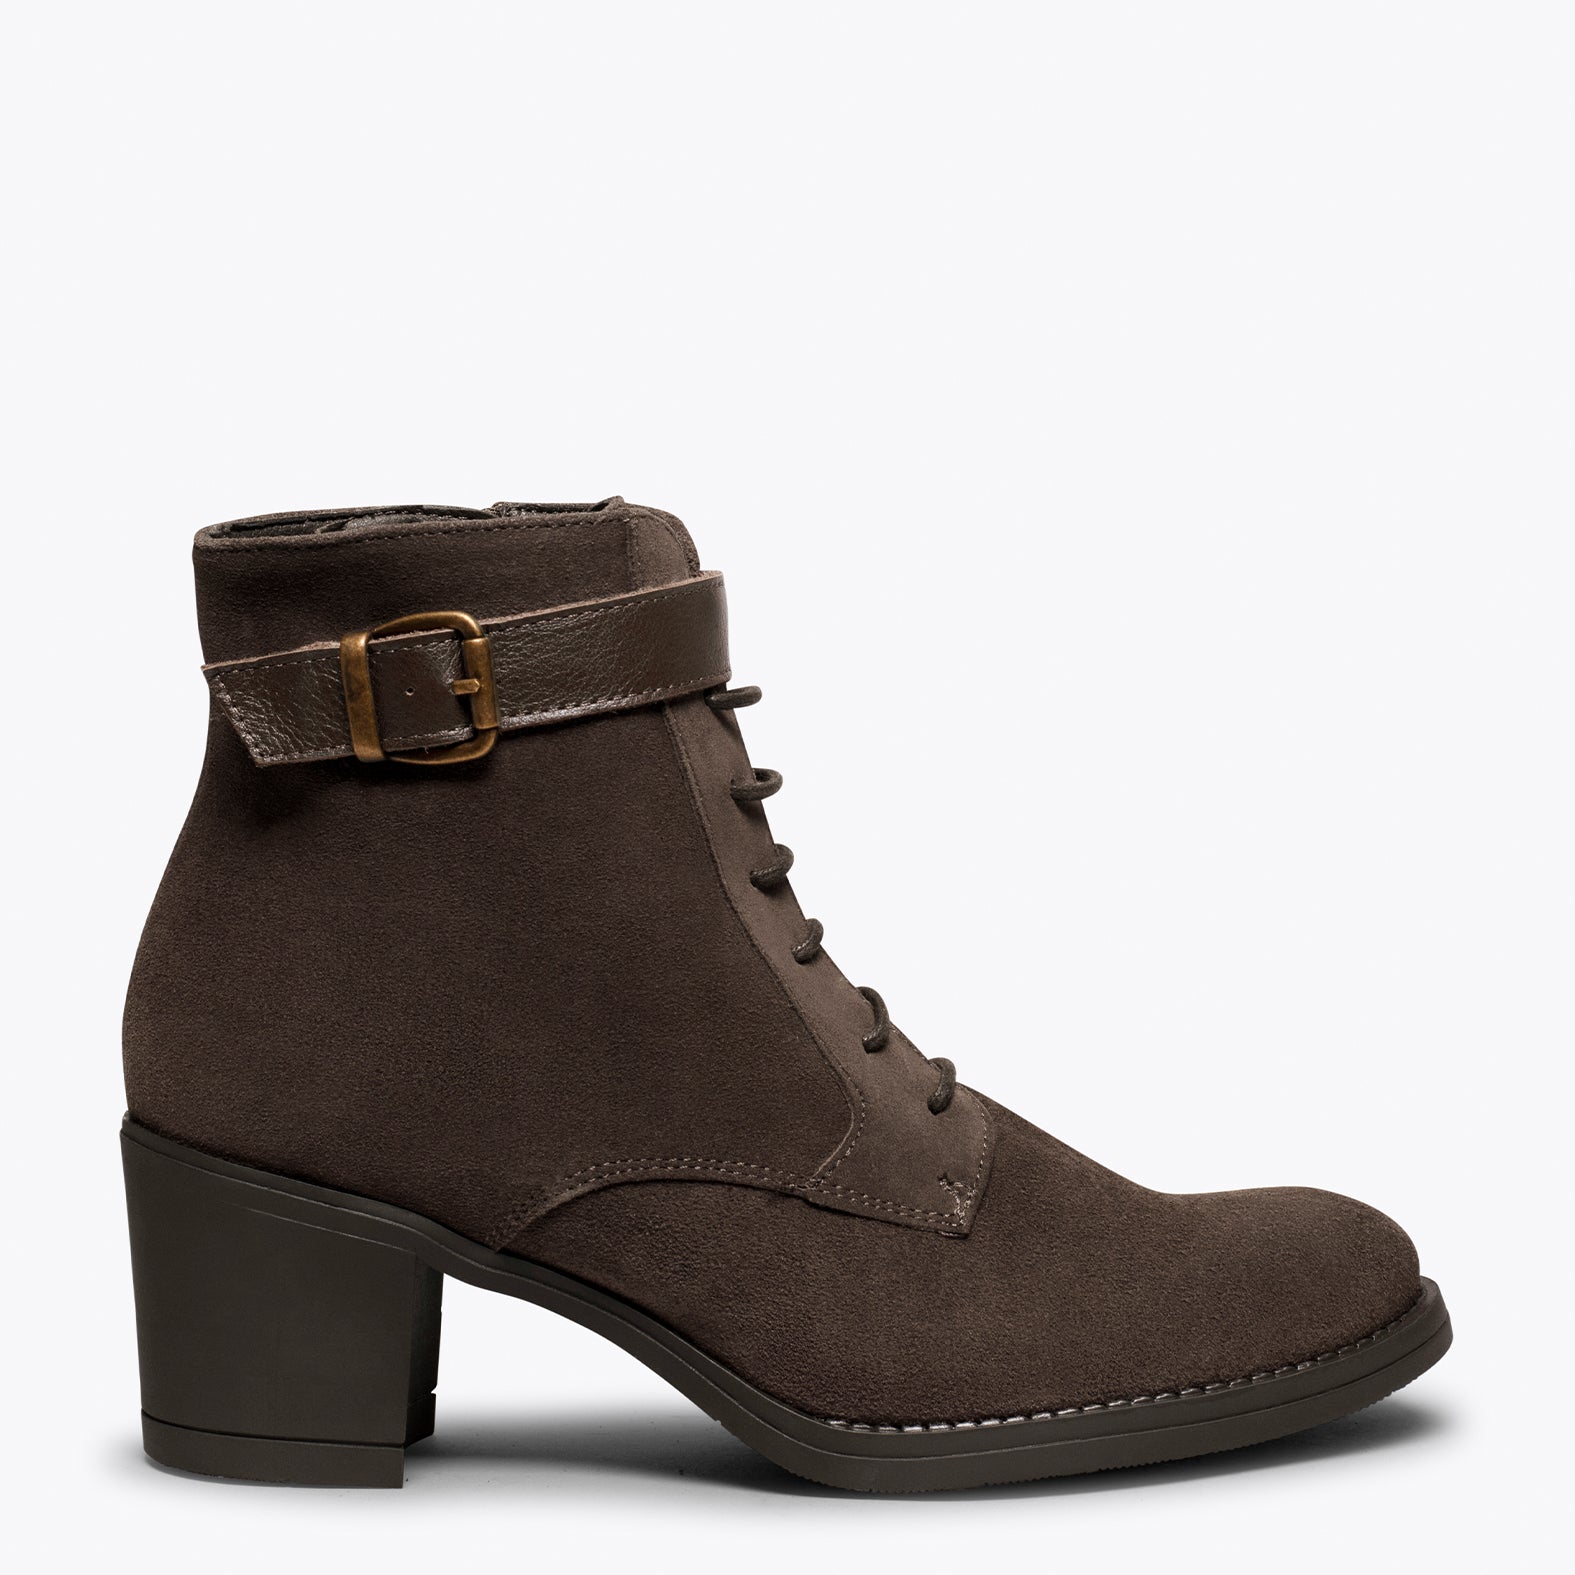 TOP – CHOCOLATE mid heel bootie with laces